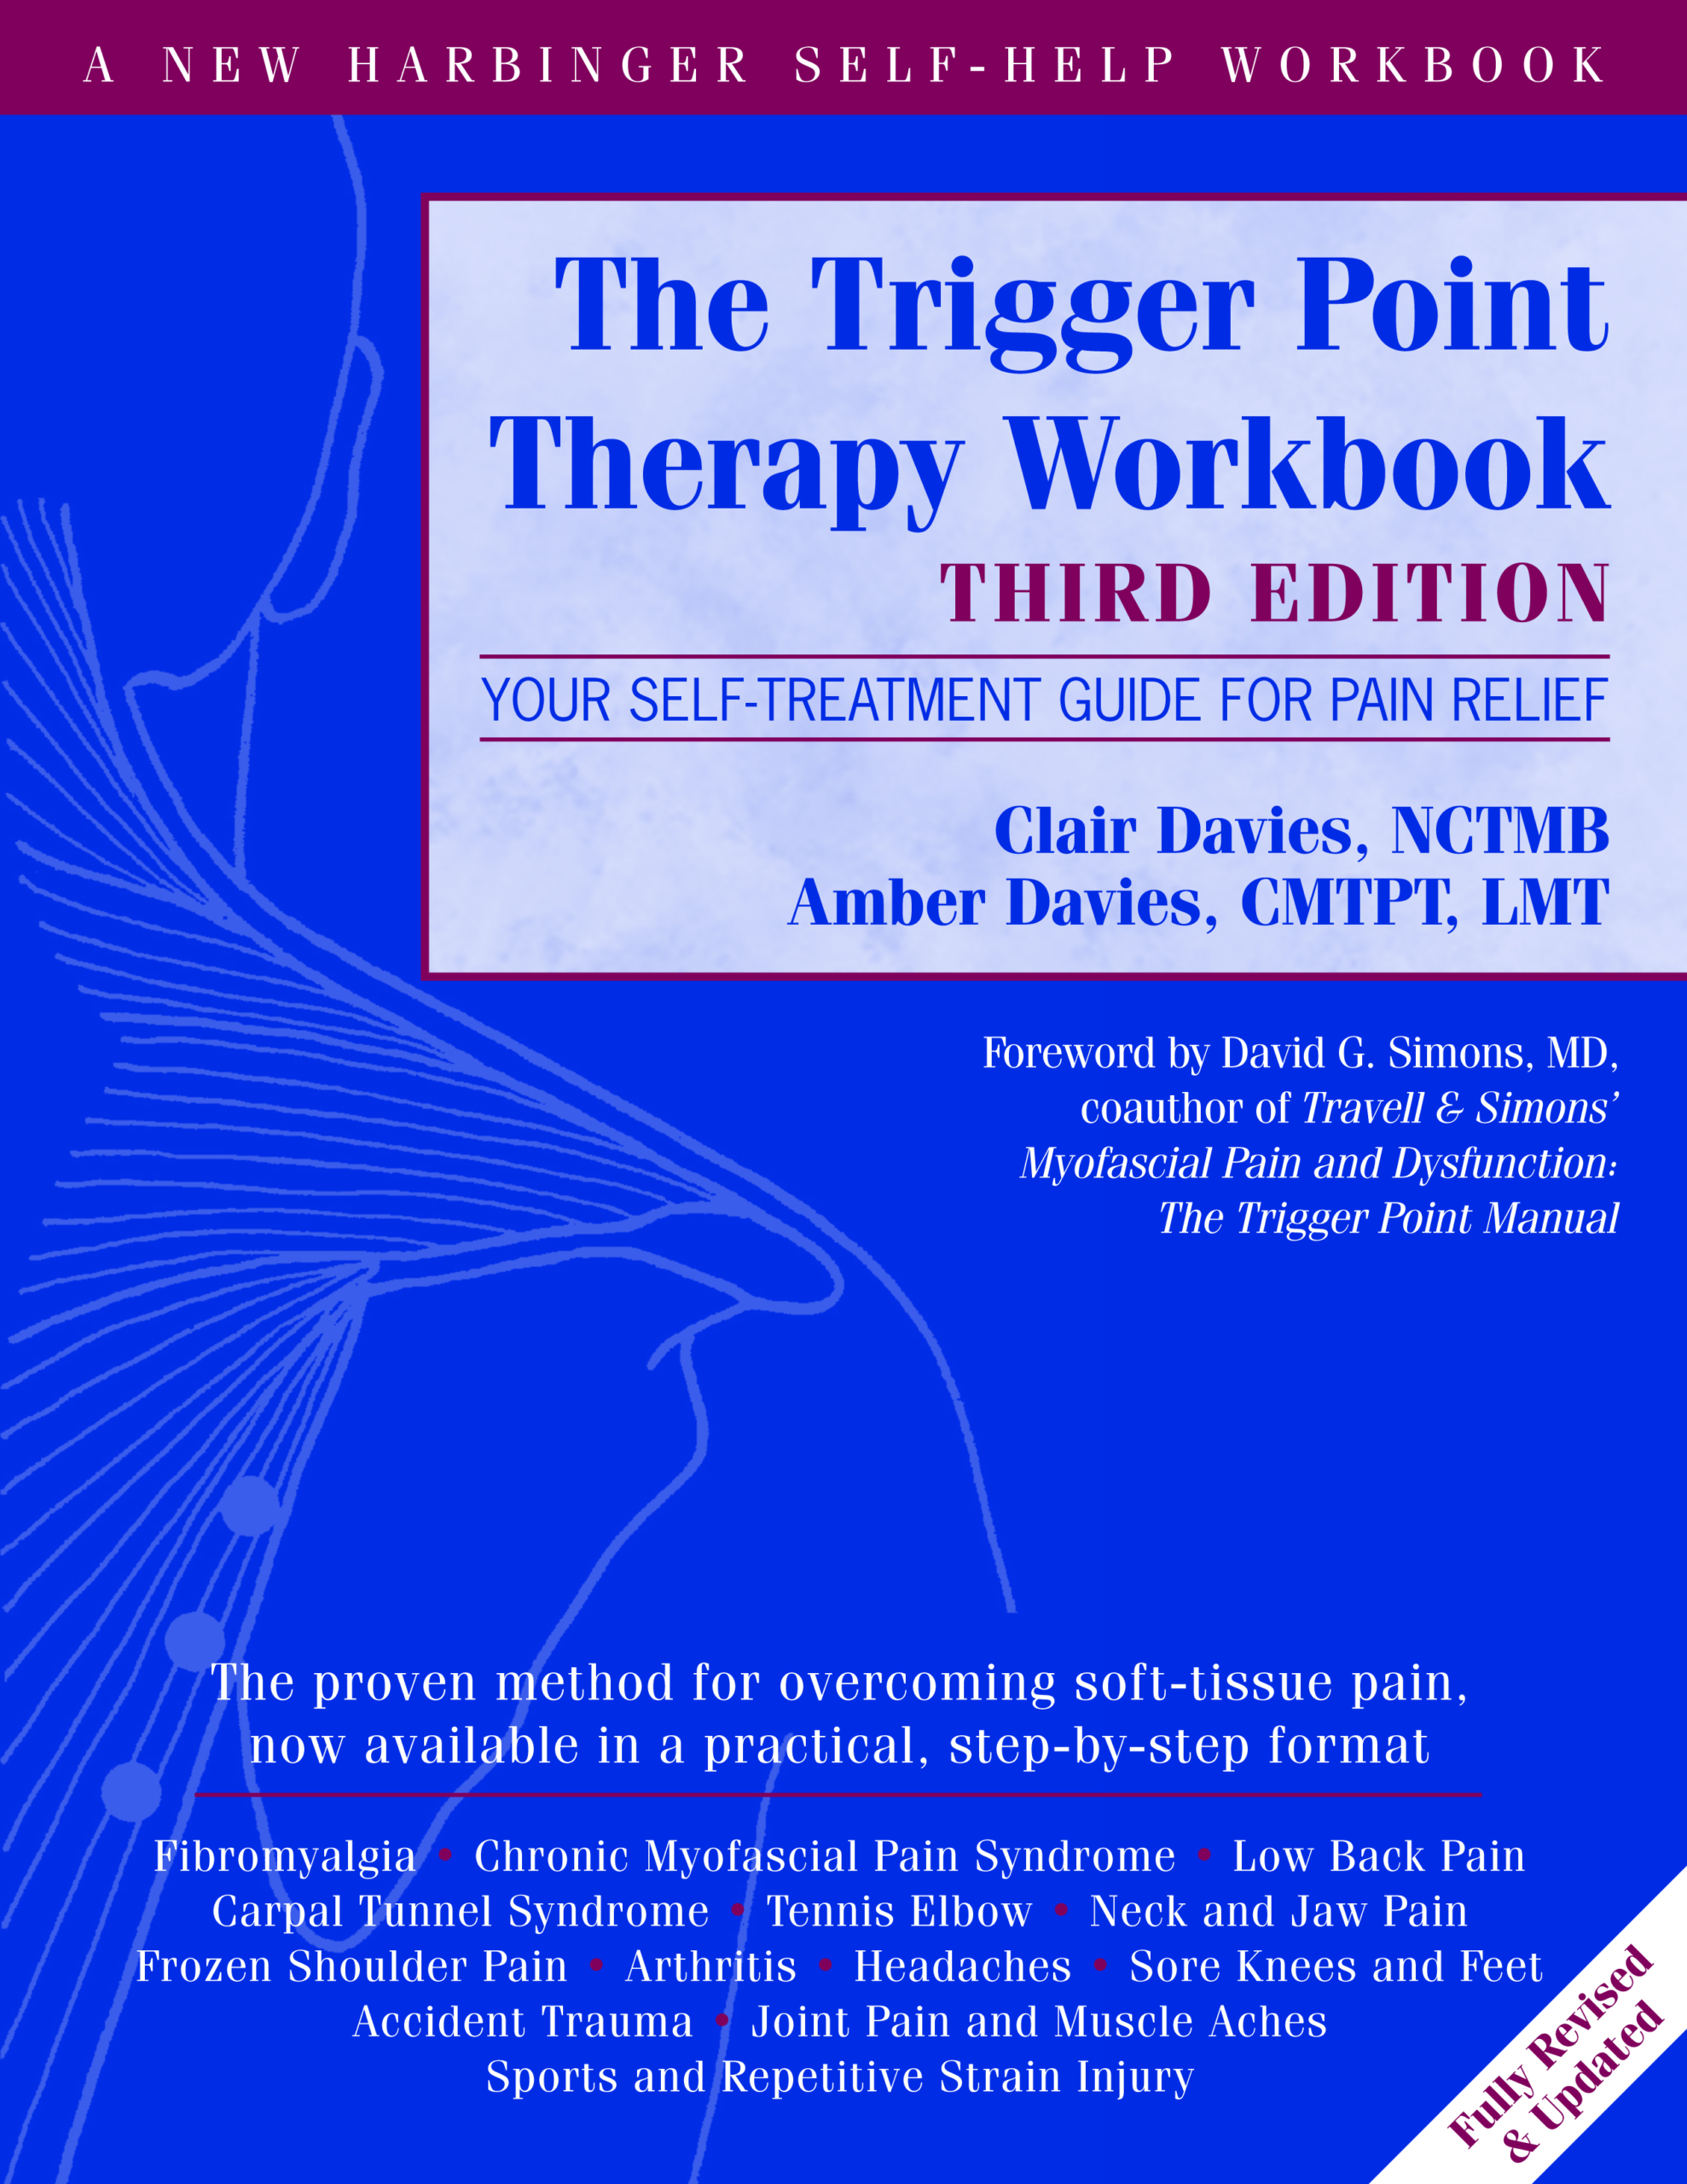 Massage and trigger point therapy for shoulder pain, with self help options   Massage and trigger point therapy for shoulder pain, including how to  treat your own shoulder with massage or trigger